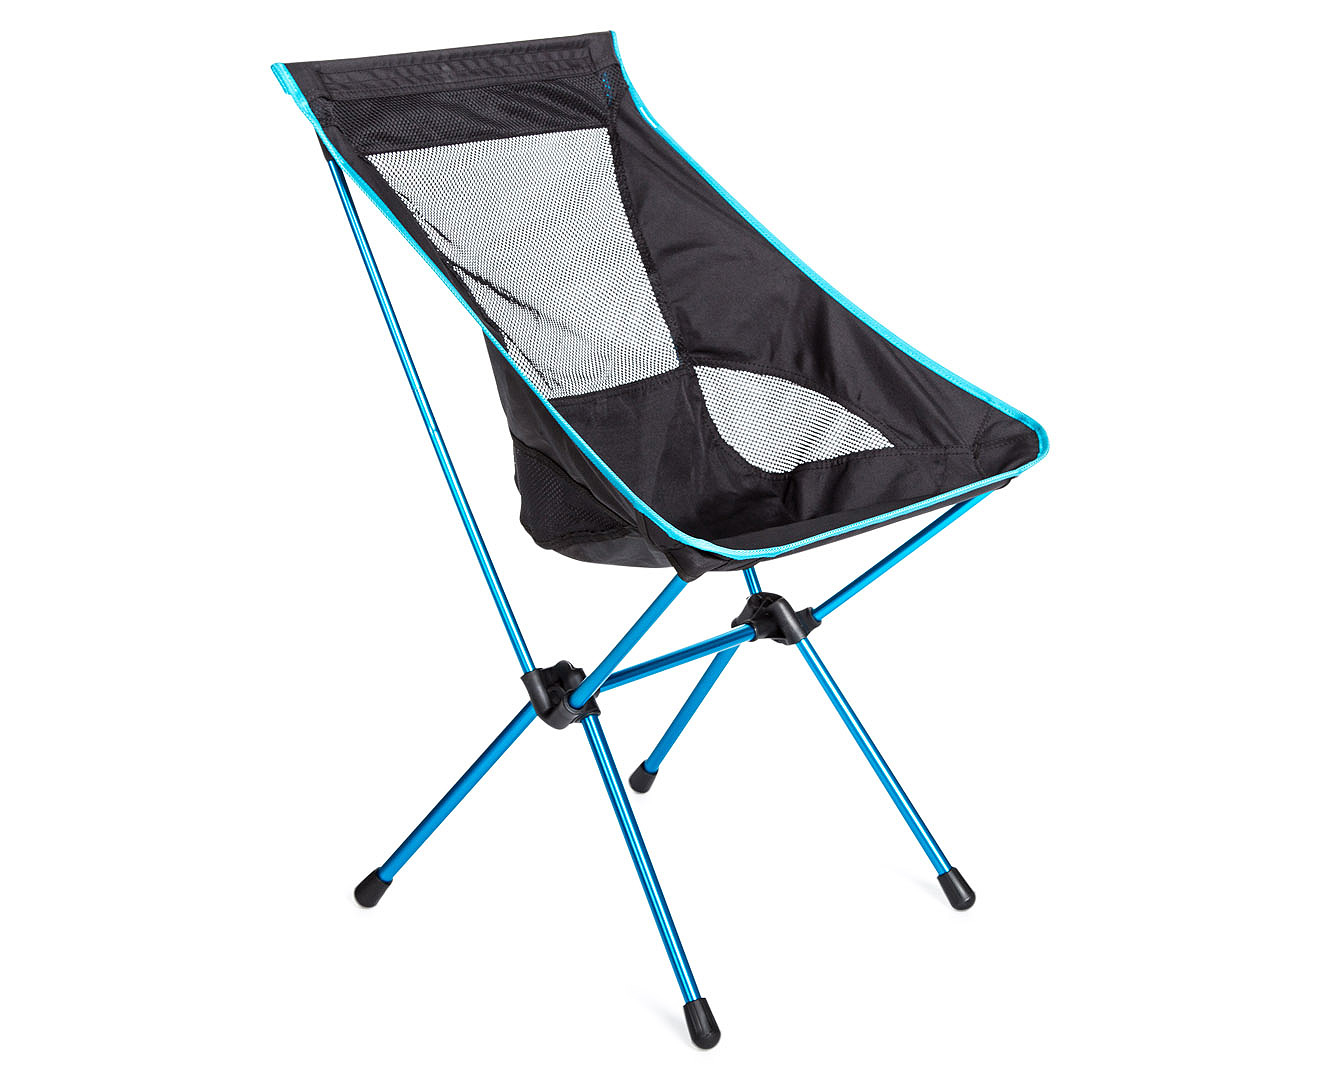 New Best Packable Beach Chair for Simple Design